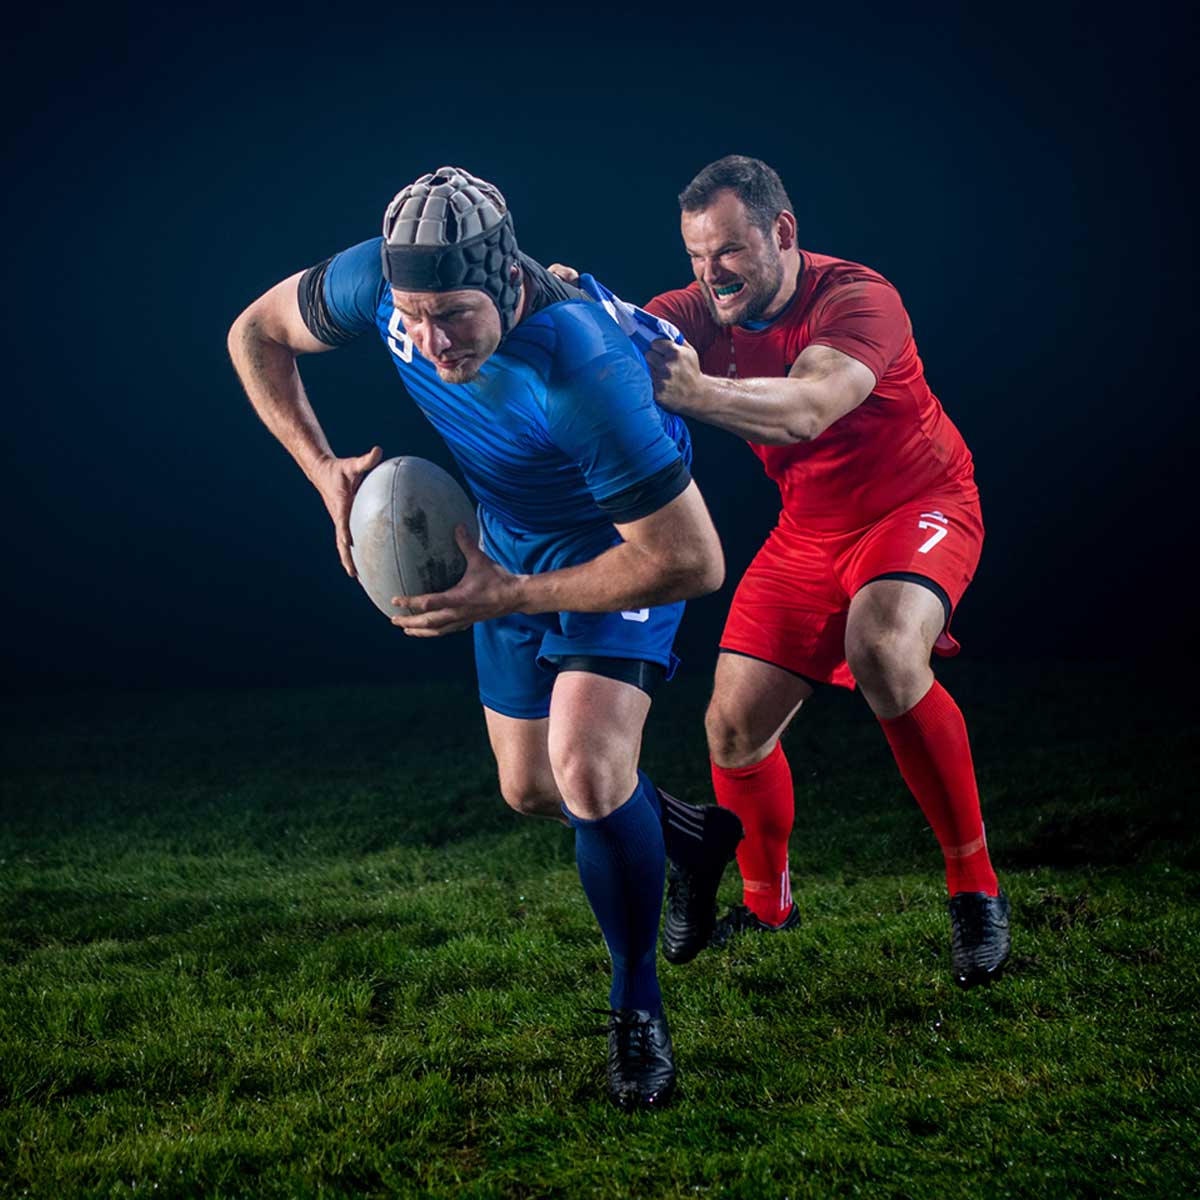 Rugby Shorts Manufacturers in Surgut